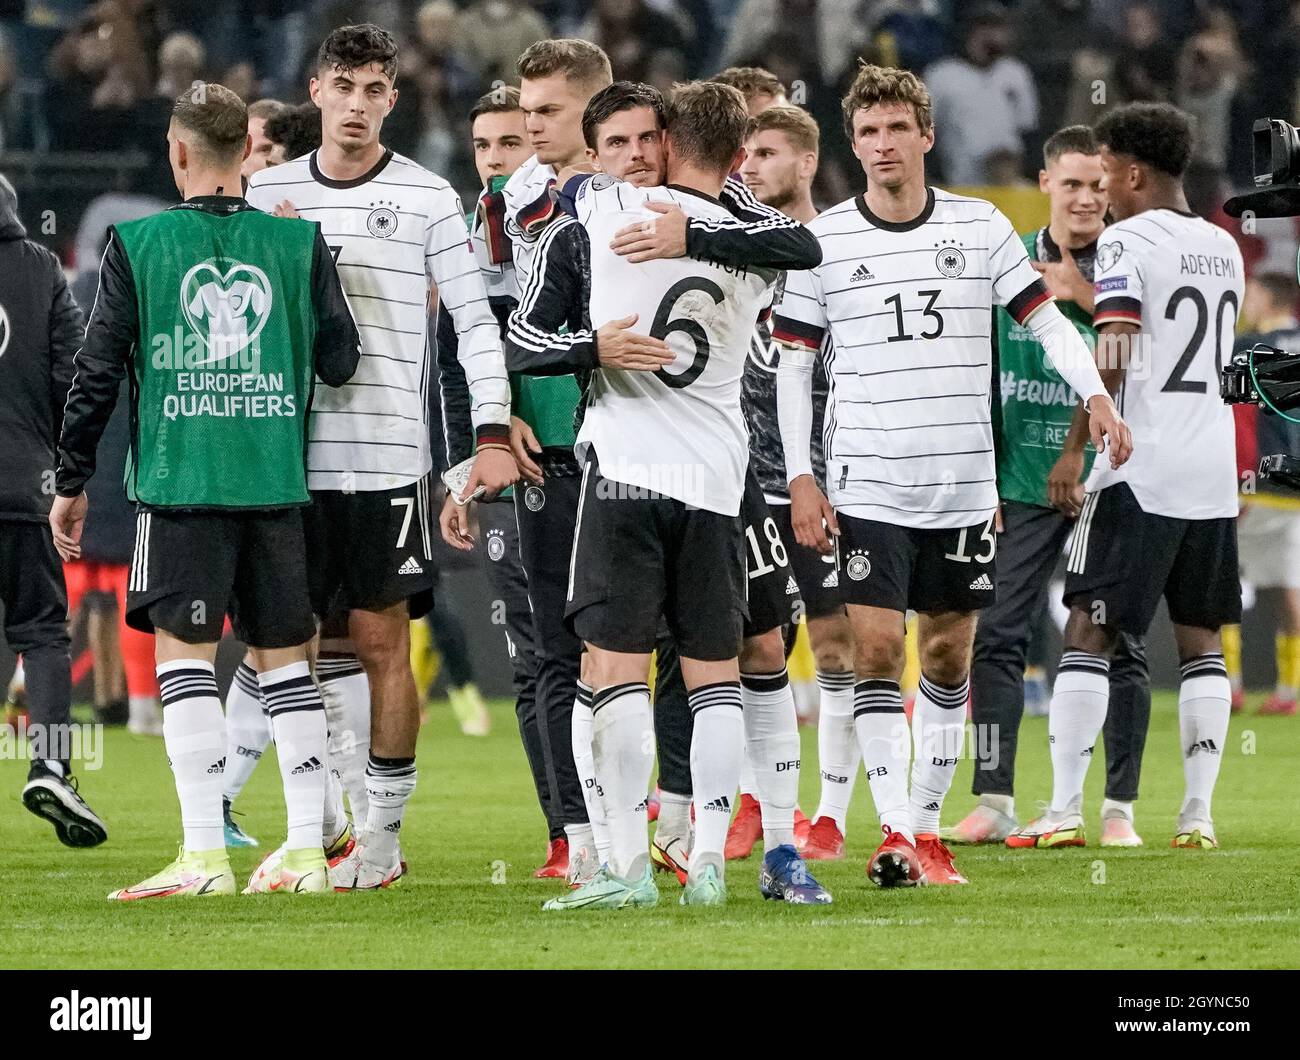 Hamburg Germany 08th Oct 21 Football World Cup Qualification Europe Germany Romania Group Stage Group J Matchday 7 At Volksparkstadion The German Team Cheers After The Final Whistle Credit Axel Heimken Dpa Alamy